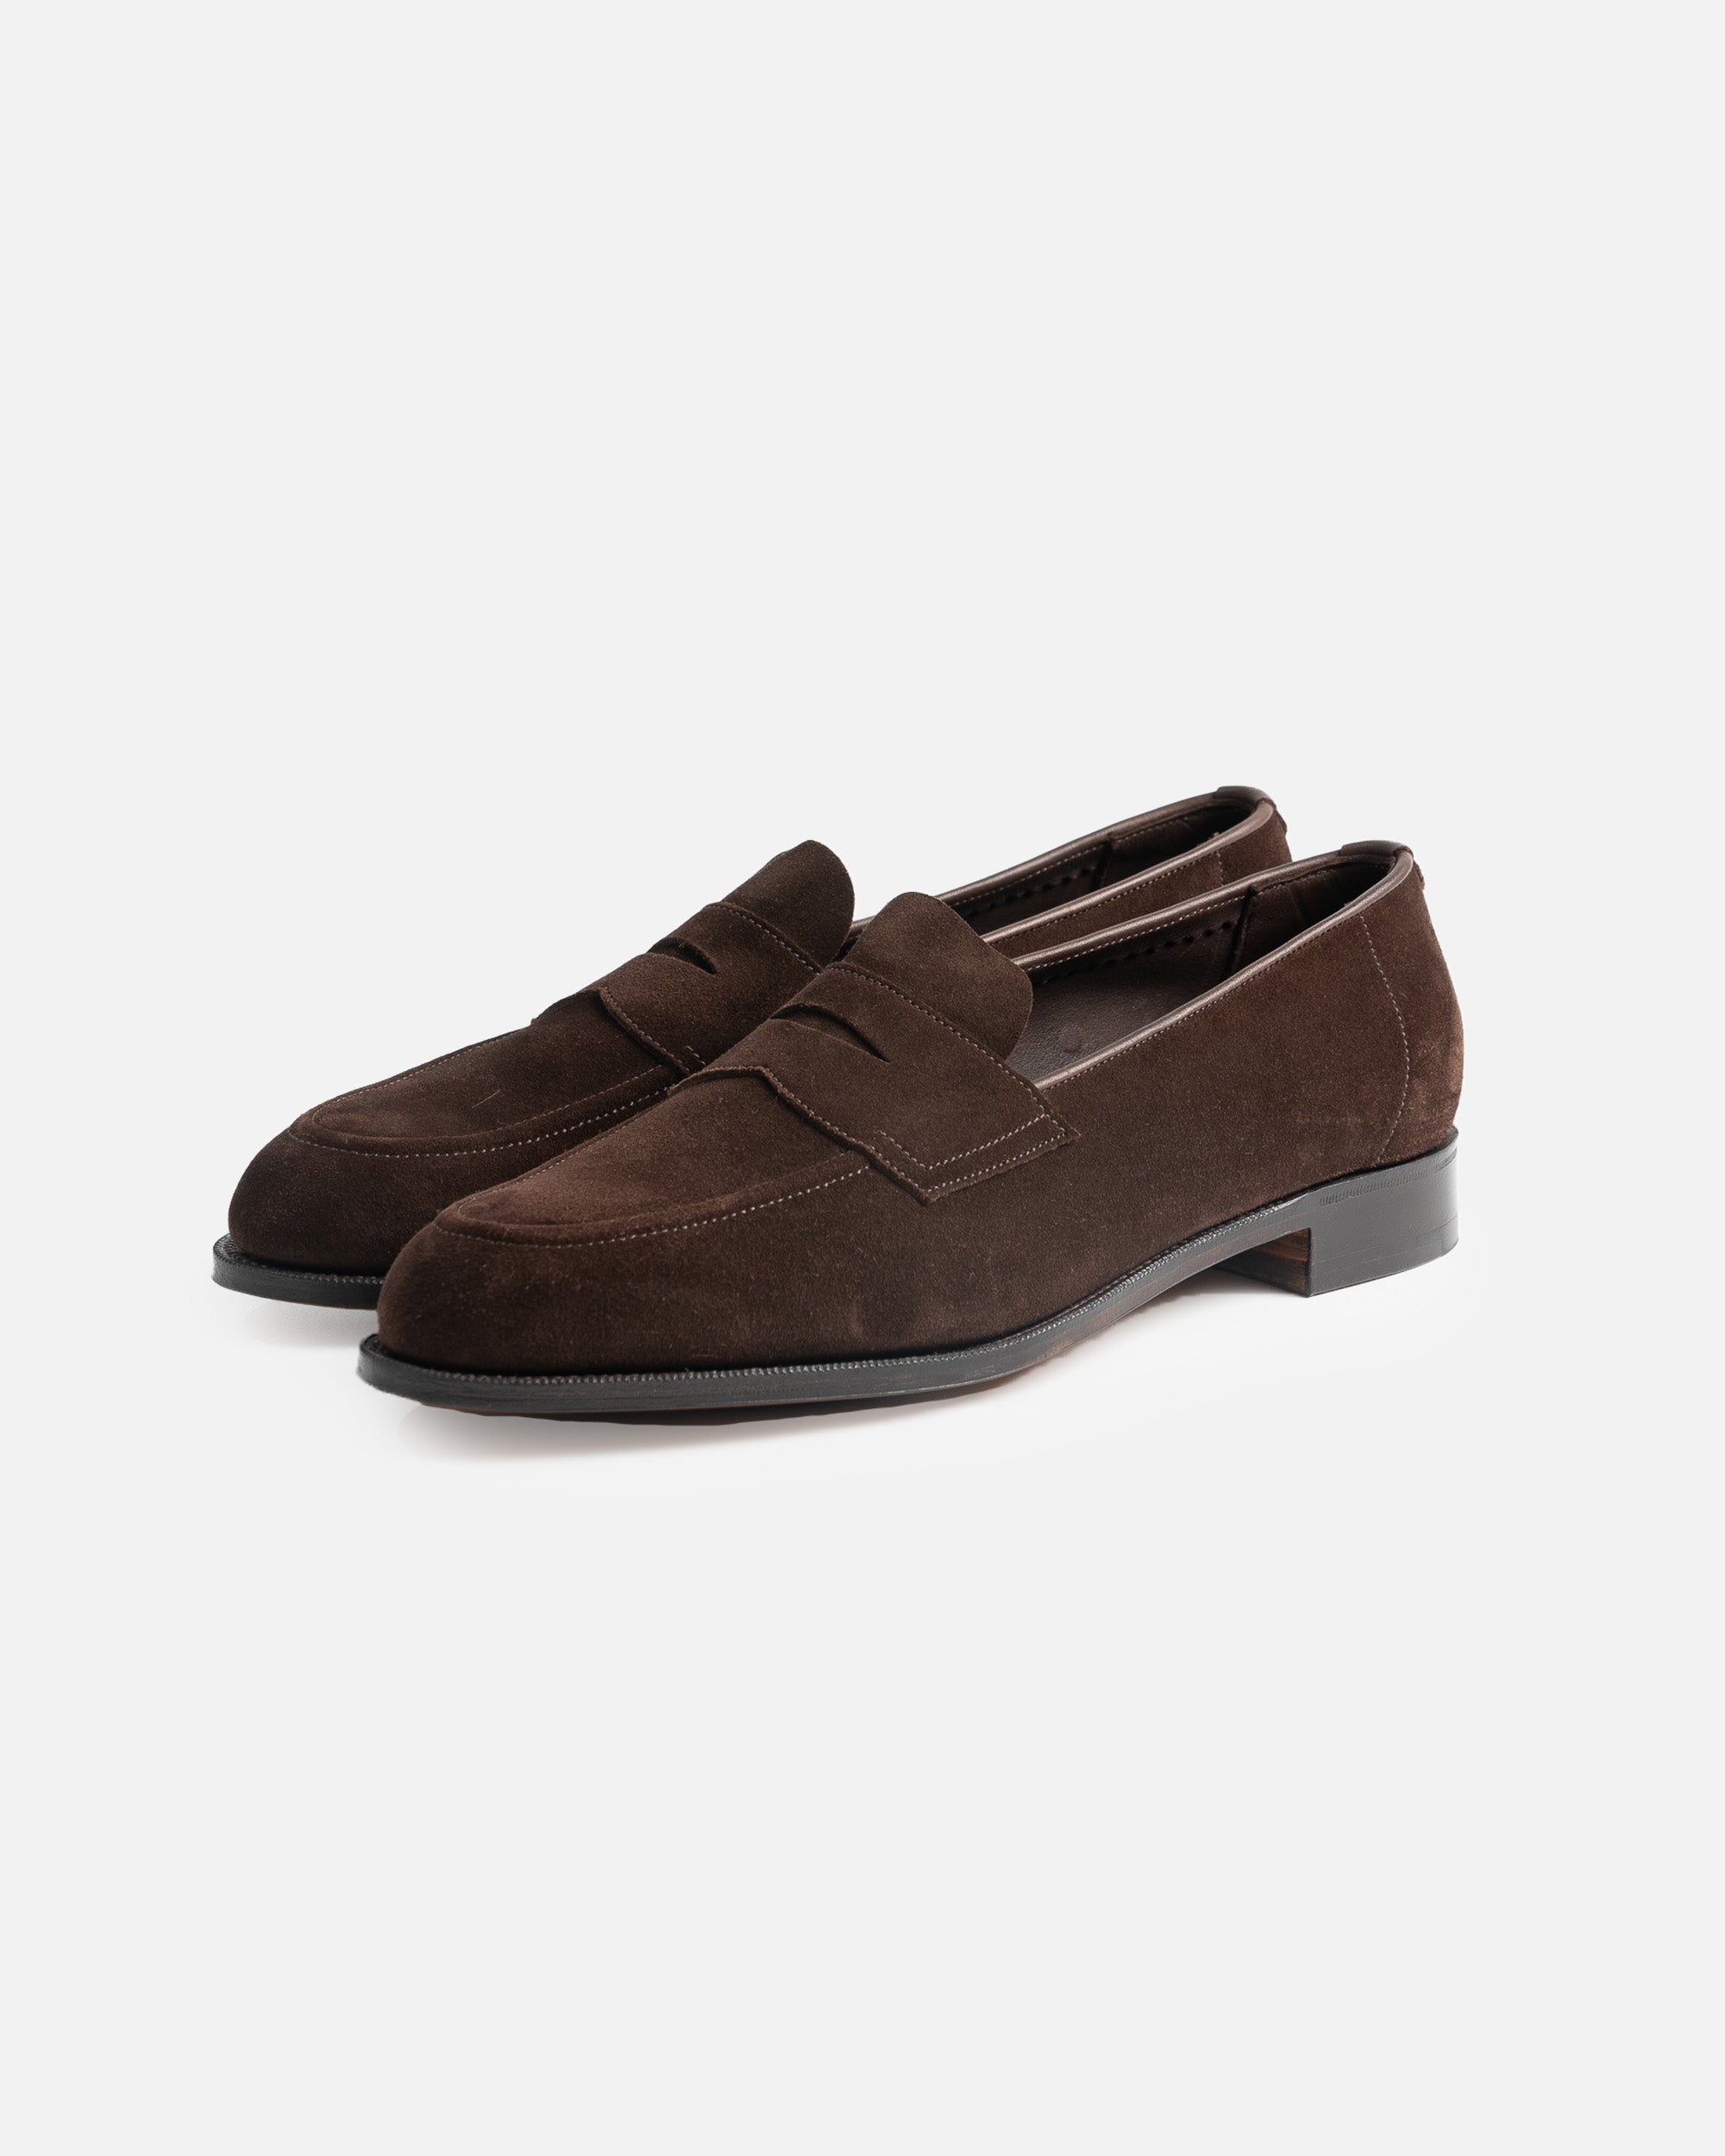 Edward Green Unlined Piccadilly Mink Suede – The Decorum Bangkok